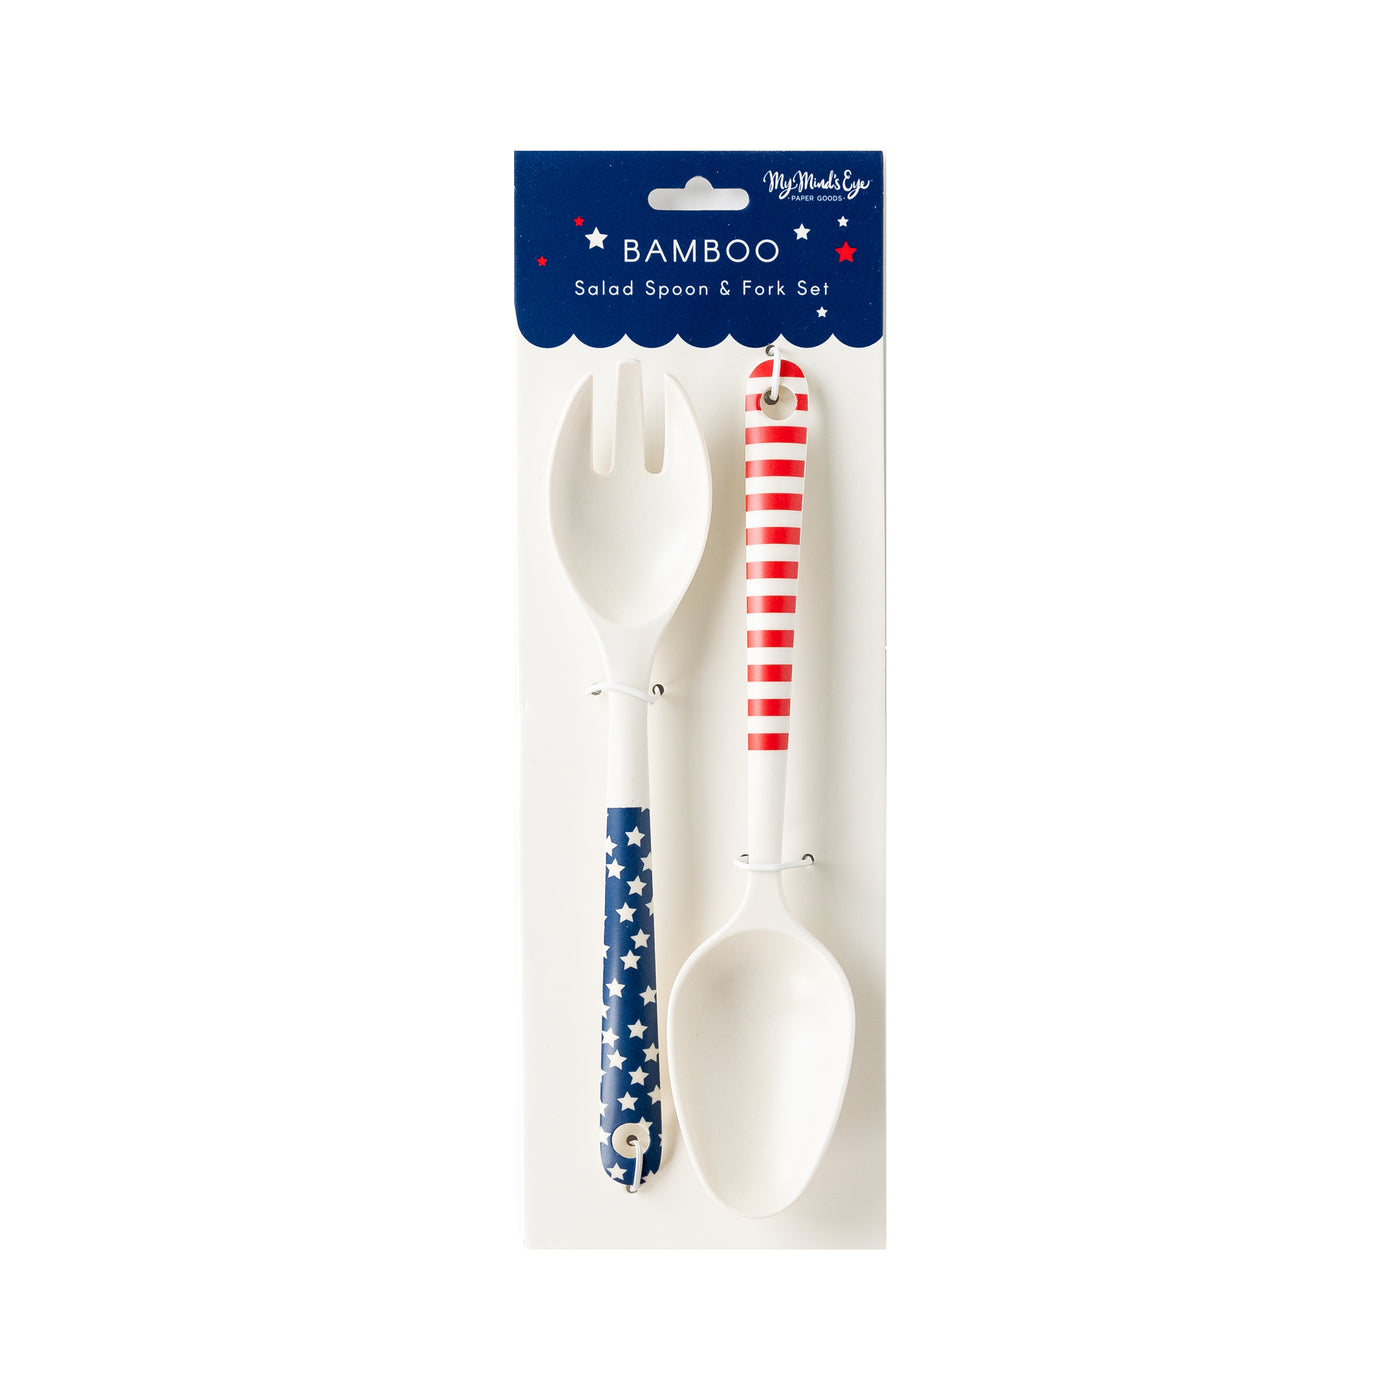 SSP924 - Stars and Stripes Salad Spoon and Fork Reusable Bamboo Serving-ware